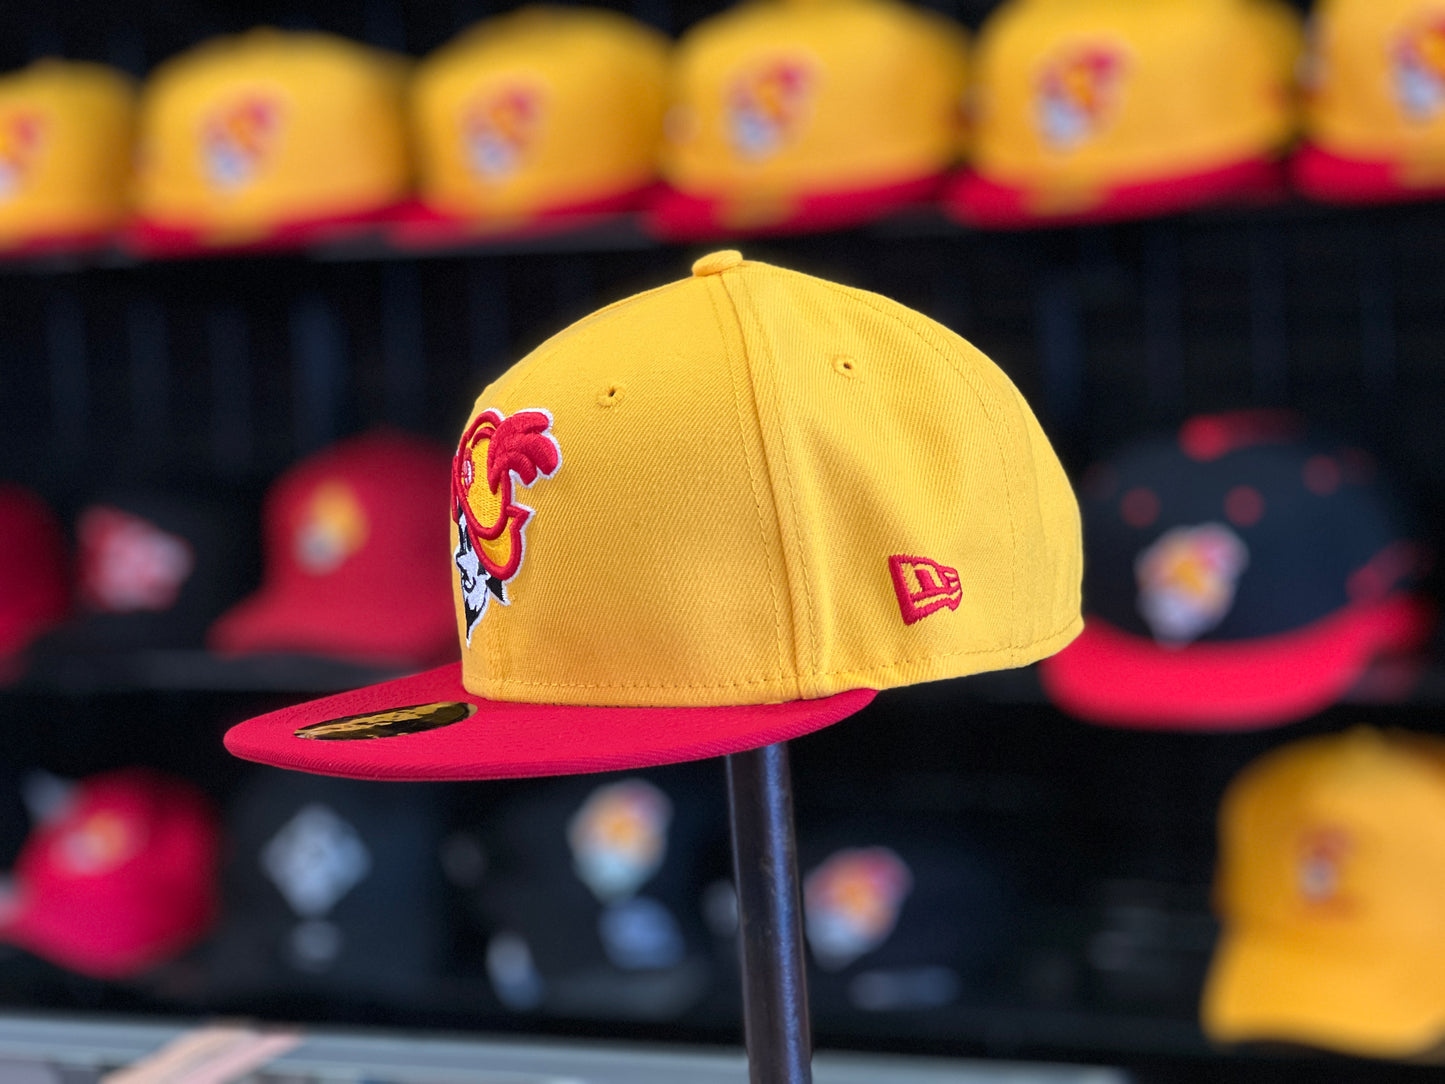 Albuquerque Dukes Gold Red Bill New Era 5950 Fitted Dukes 50 yr Patch